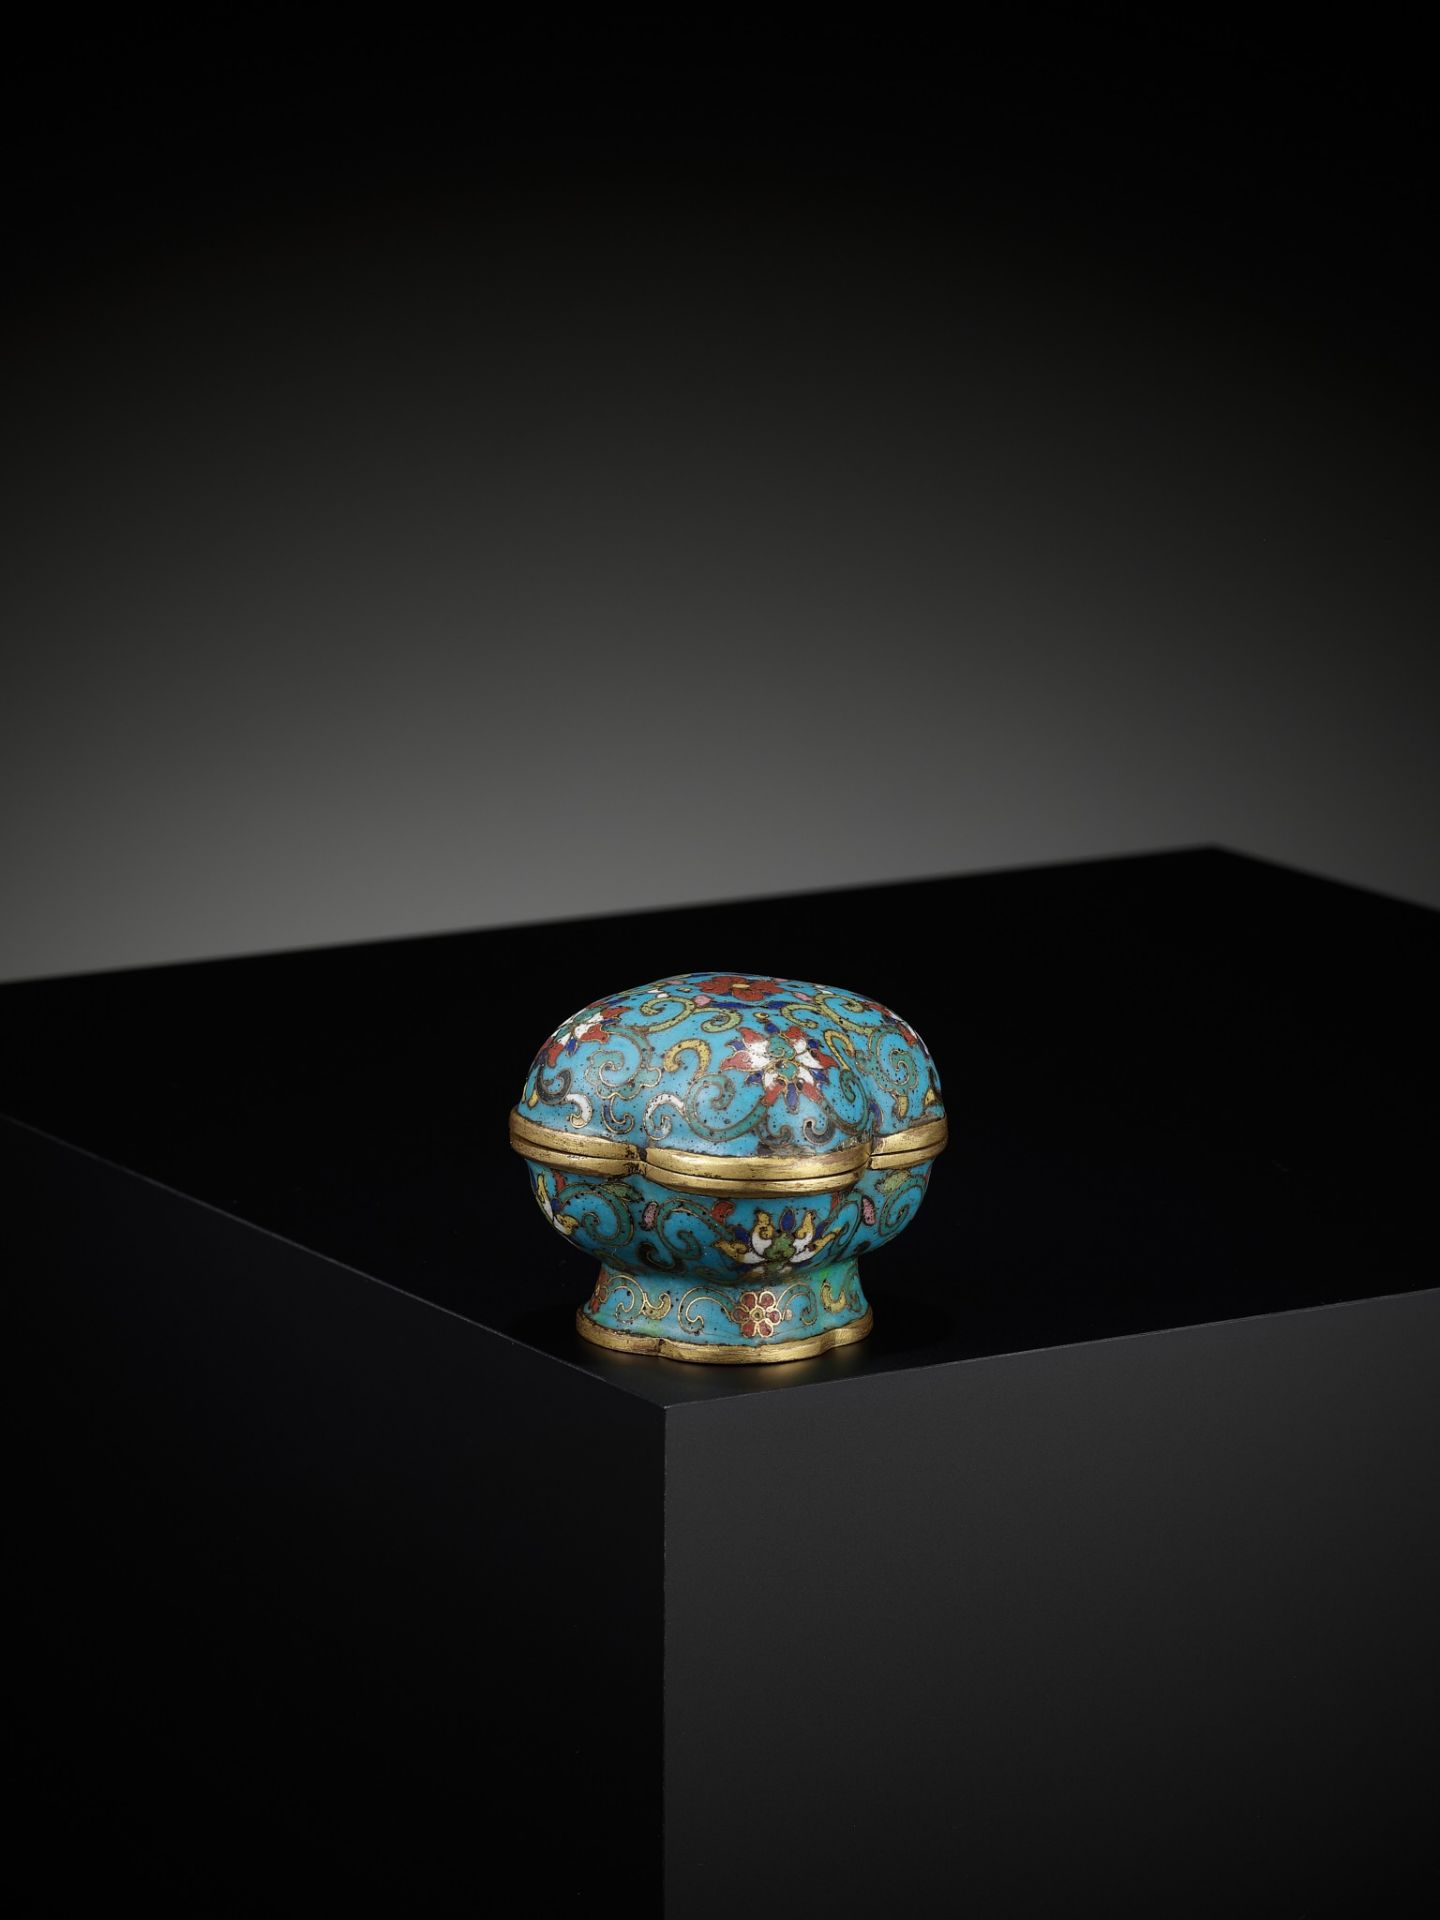 AN EXTREMELY RARE CLOISONNE ENAMEL QUADRILOBED BOX AND COVER, QIANLONG MARK AND OF THE PERIOD - Image 11 of 21